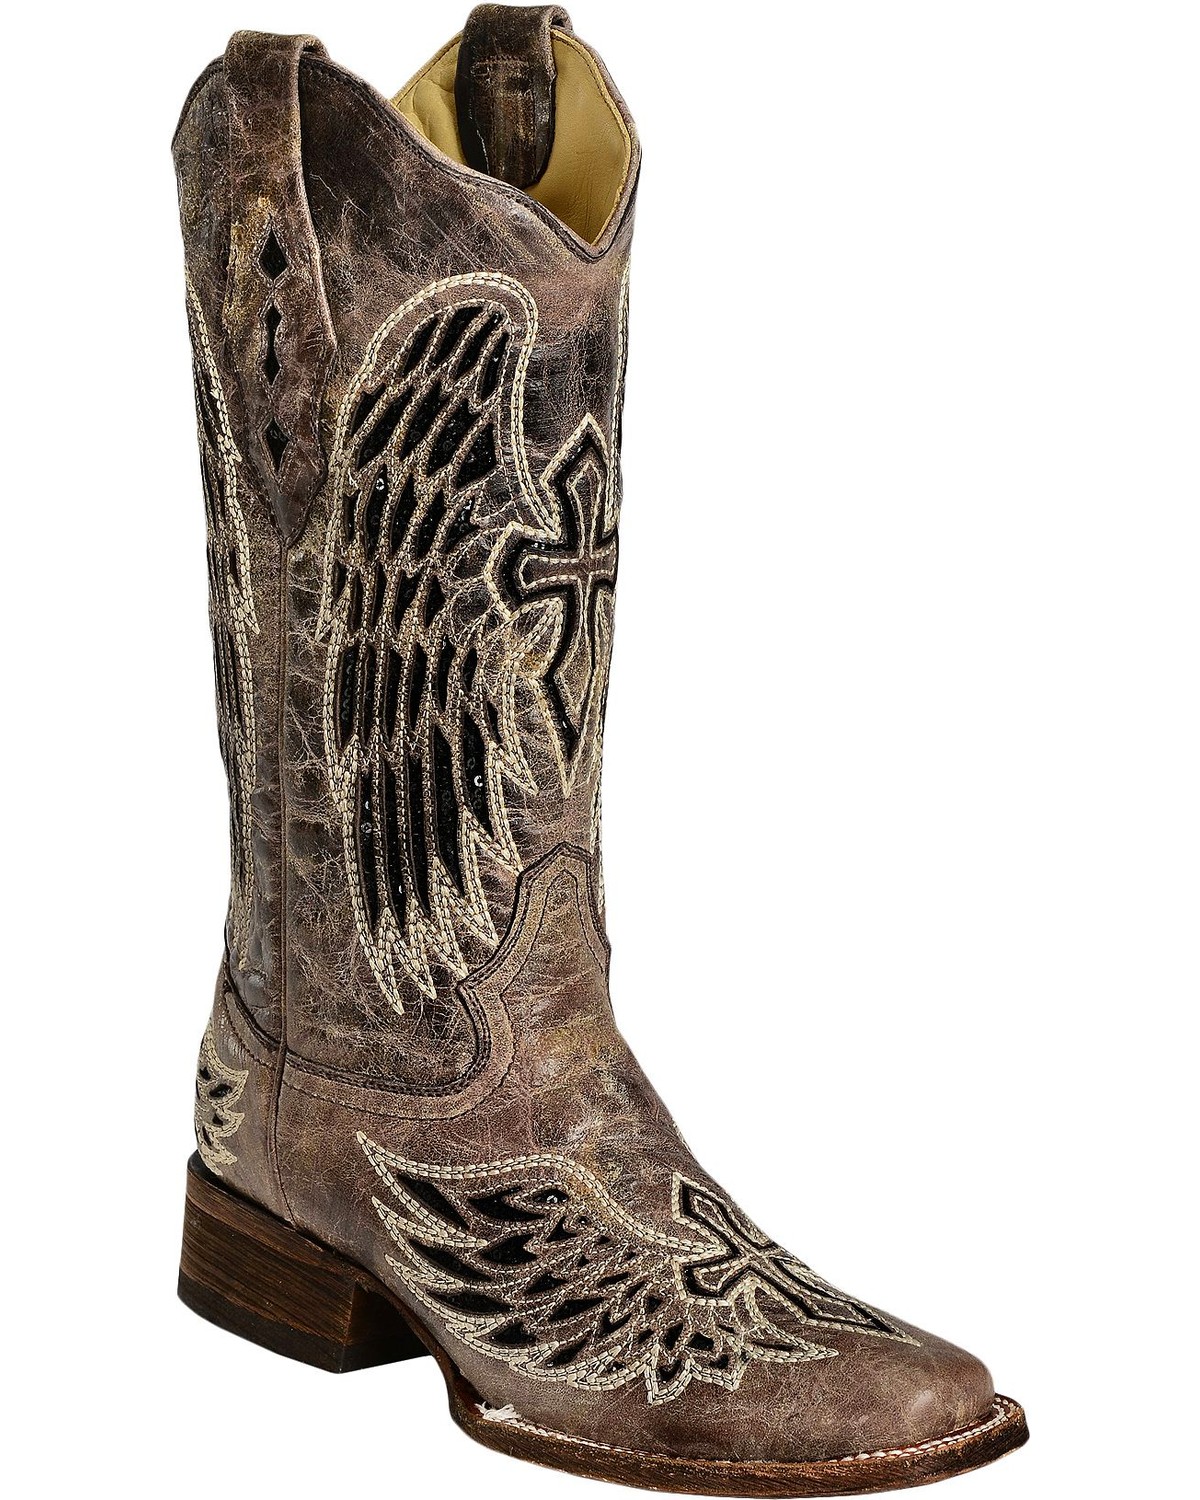 Corral Women's Sequin Wing & Cross Inlay Western Boots - Square Toe